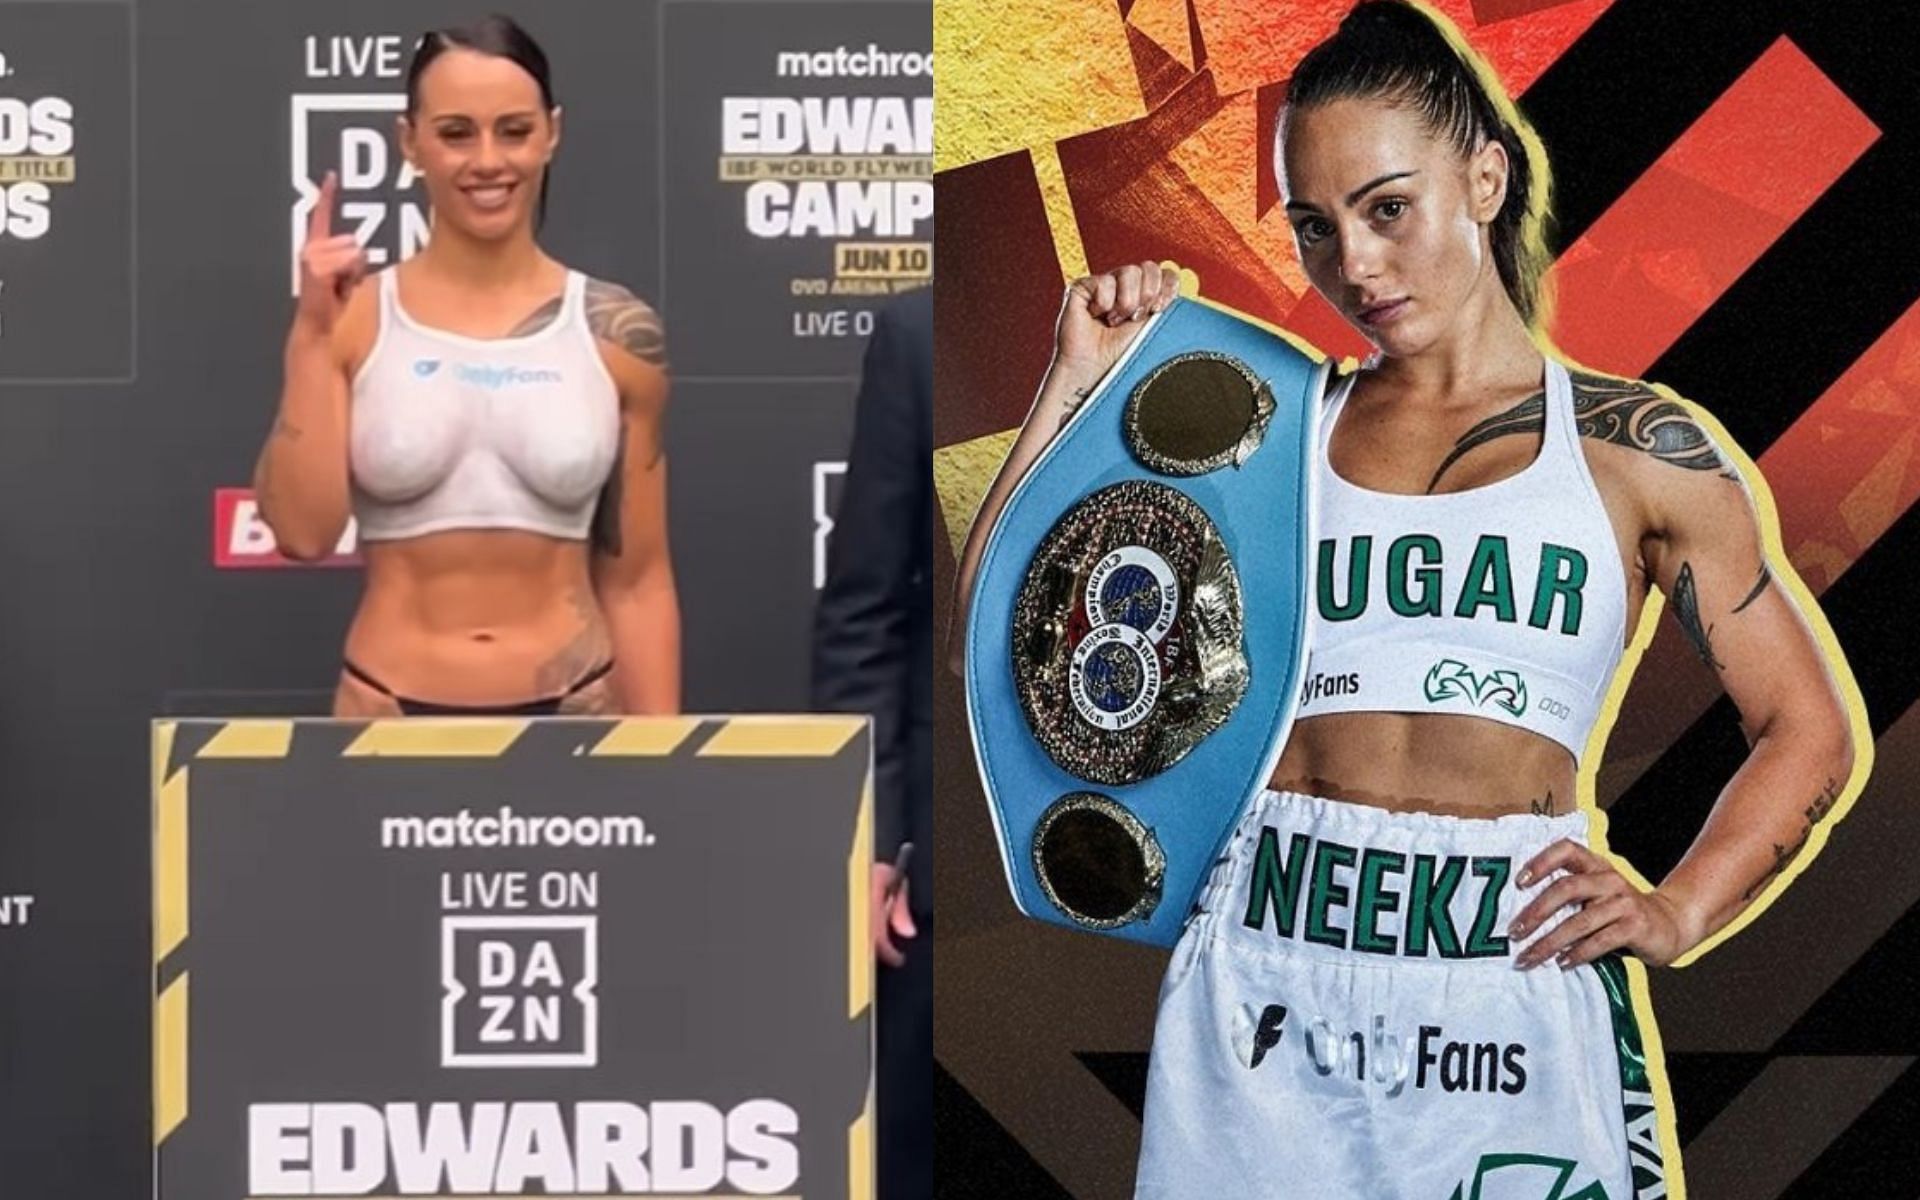 Cherneka Johnson at weigh-ins (left) and holding her IBF super bantamweight title (right) [Images Courtesy: @sugar_neekz and @matchroomboxing on Instagram]